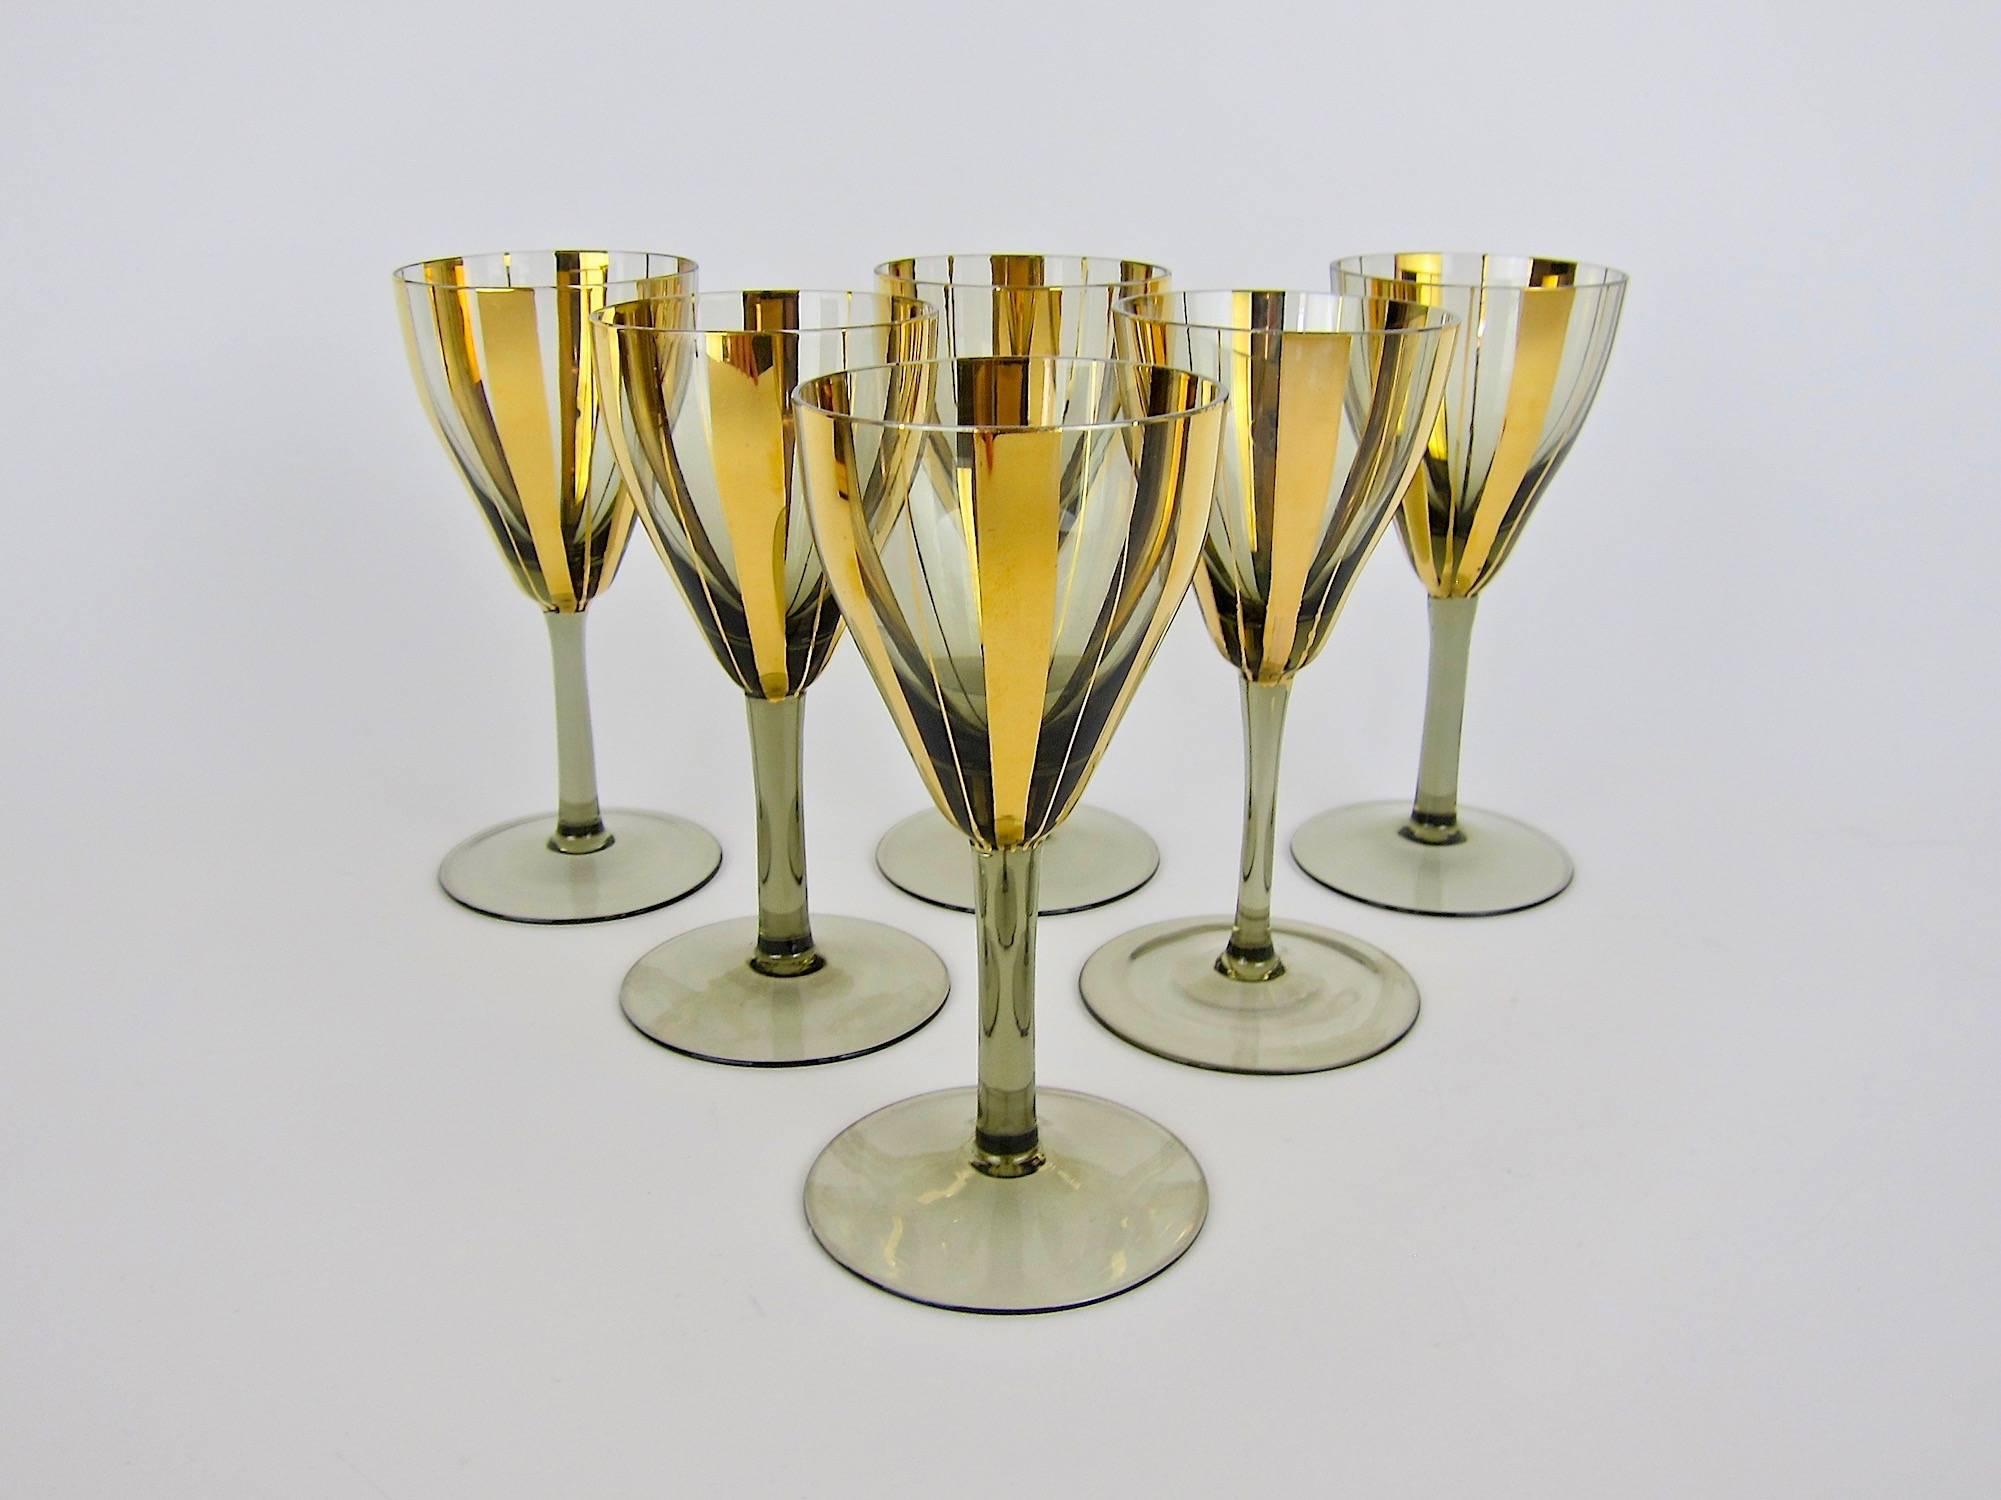 A stylish set of six vintage glasses in smoked glass with gold stripes dating, circa 1970s. Unmarked and in very good condition, measuring 6 in. H x 2.75 in. diameter (at rim); each glass holds 4.5 oz. filled to the rim.